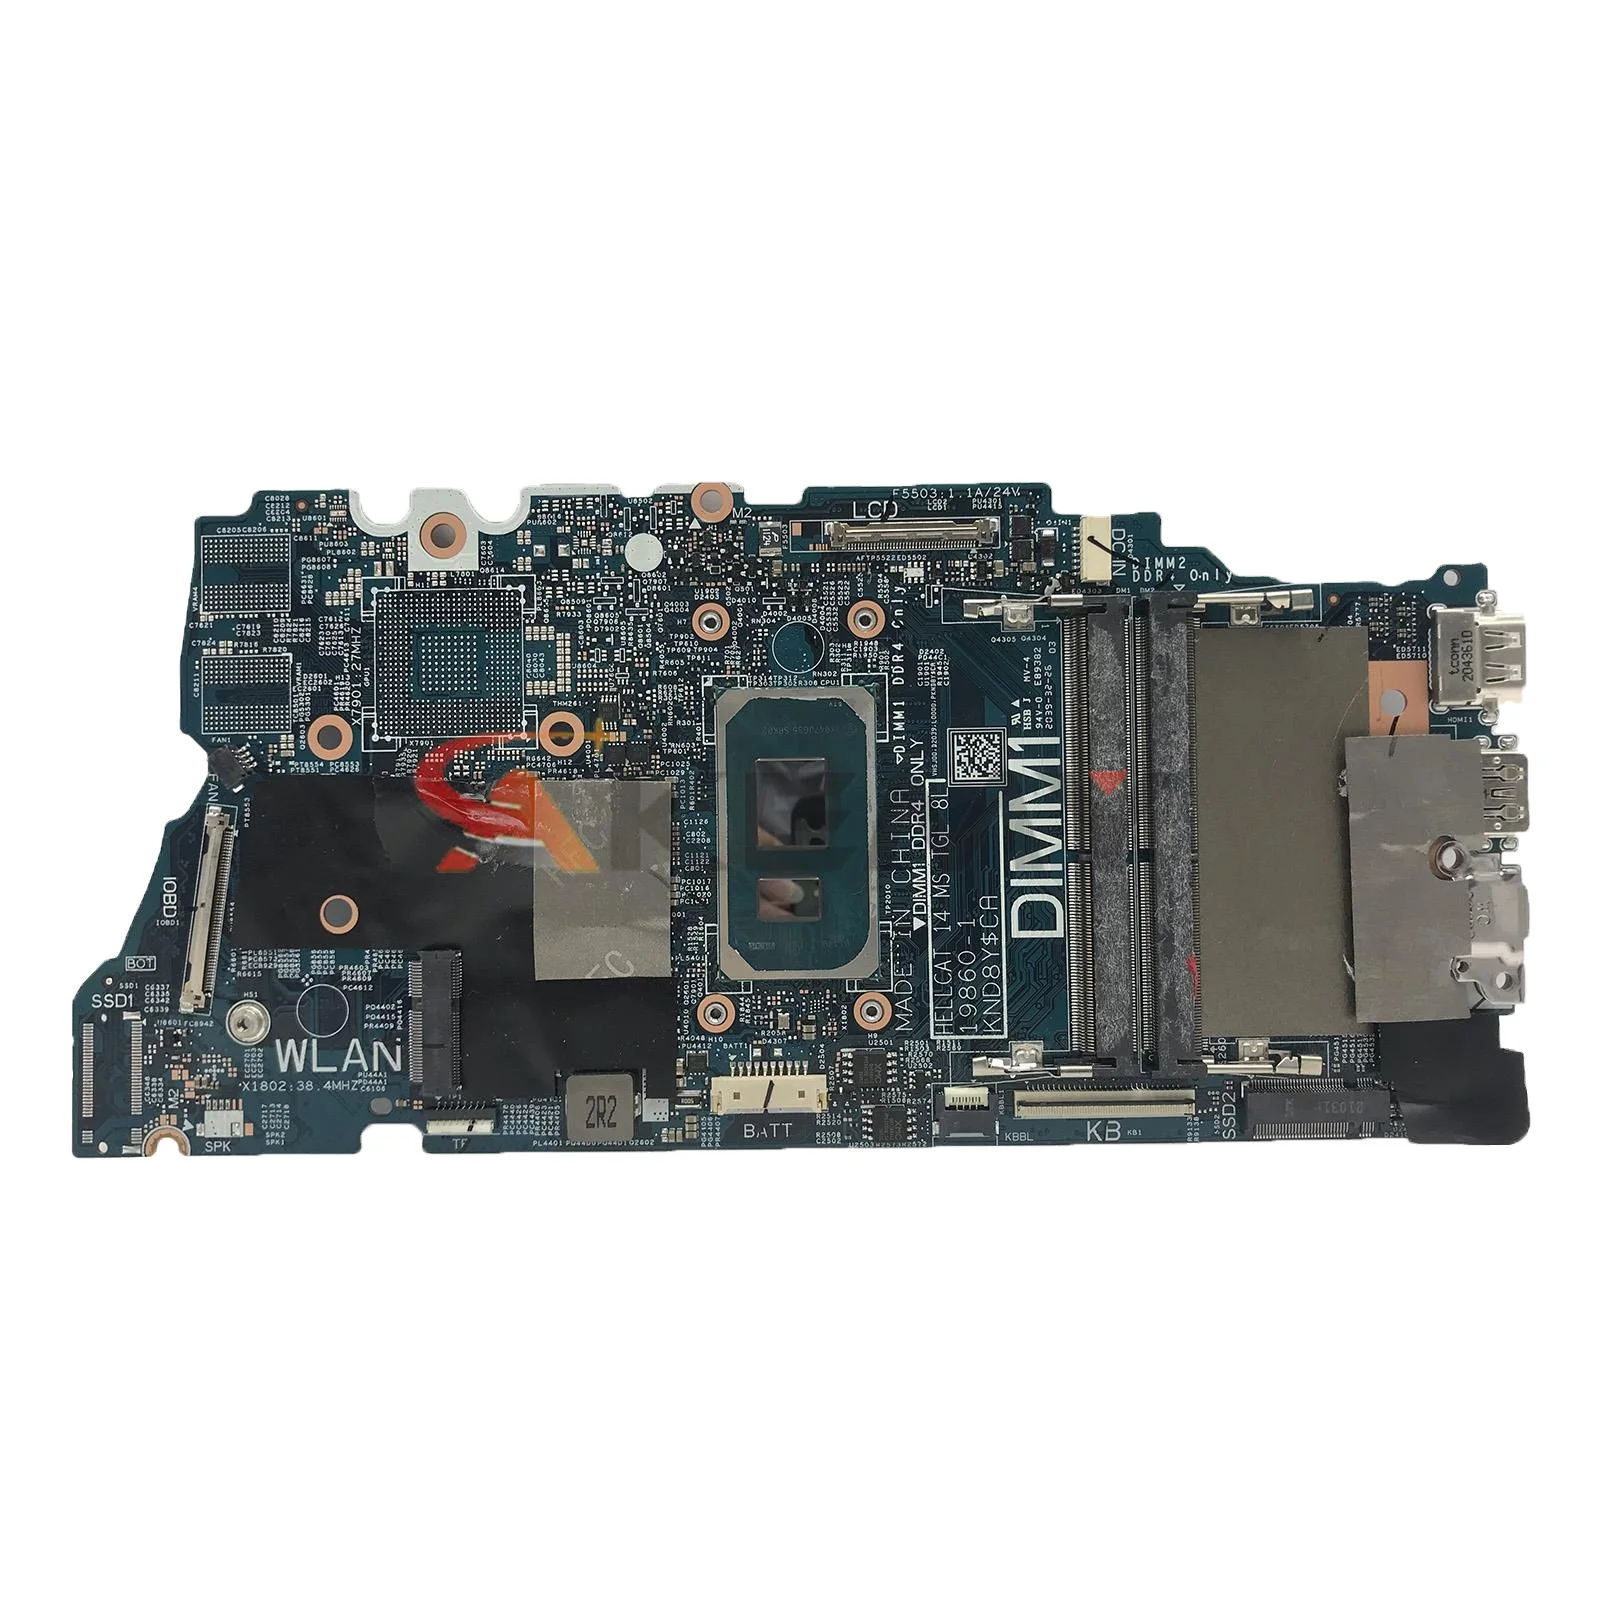 

For DELL inspiron 14 5400 5406 Laptop Motherboard with I3-1115G4 I5-1135G7 I7-1165G7 CPU CN-0VMRNH 0FW6F0 Mainboard 19860-1